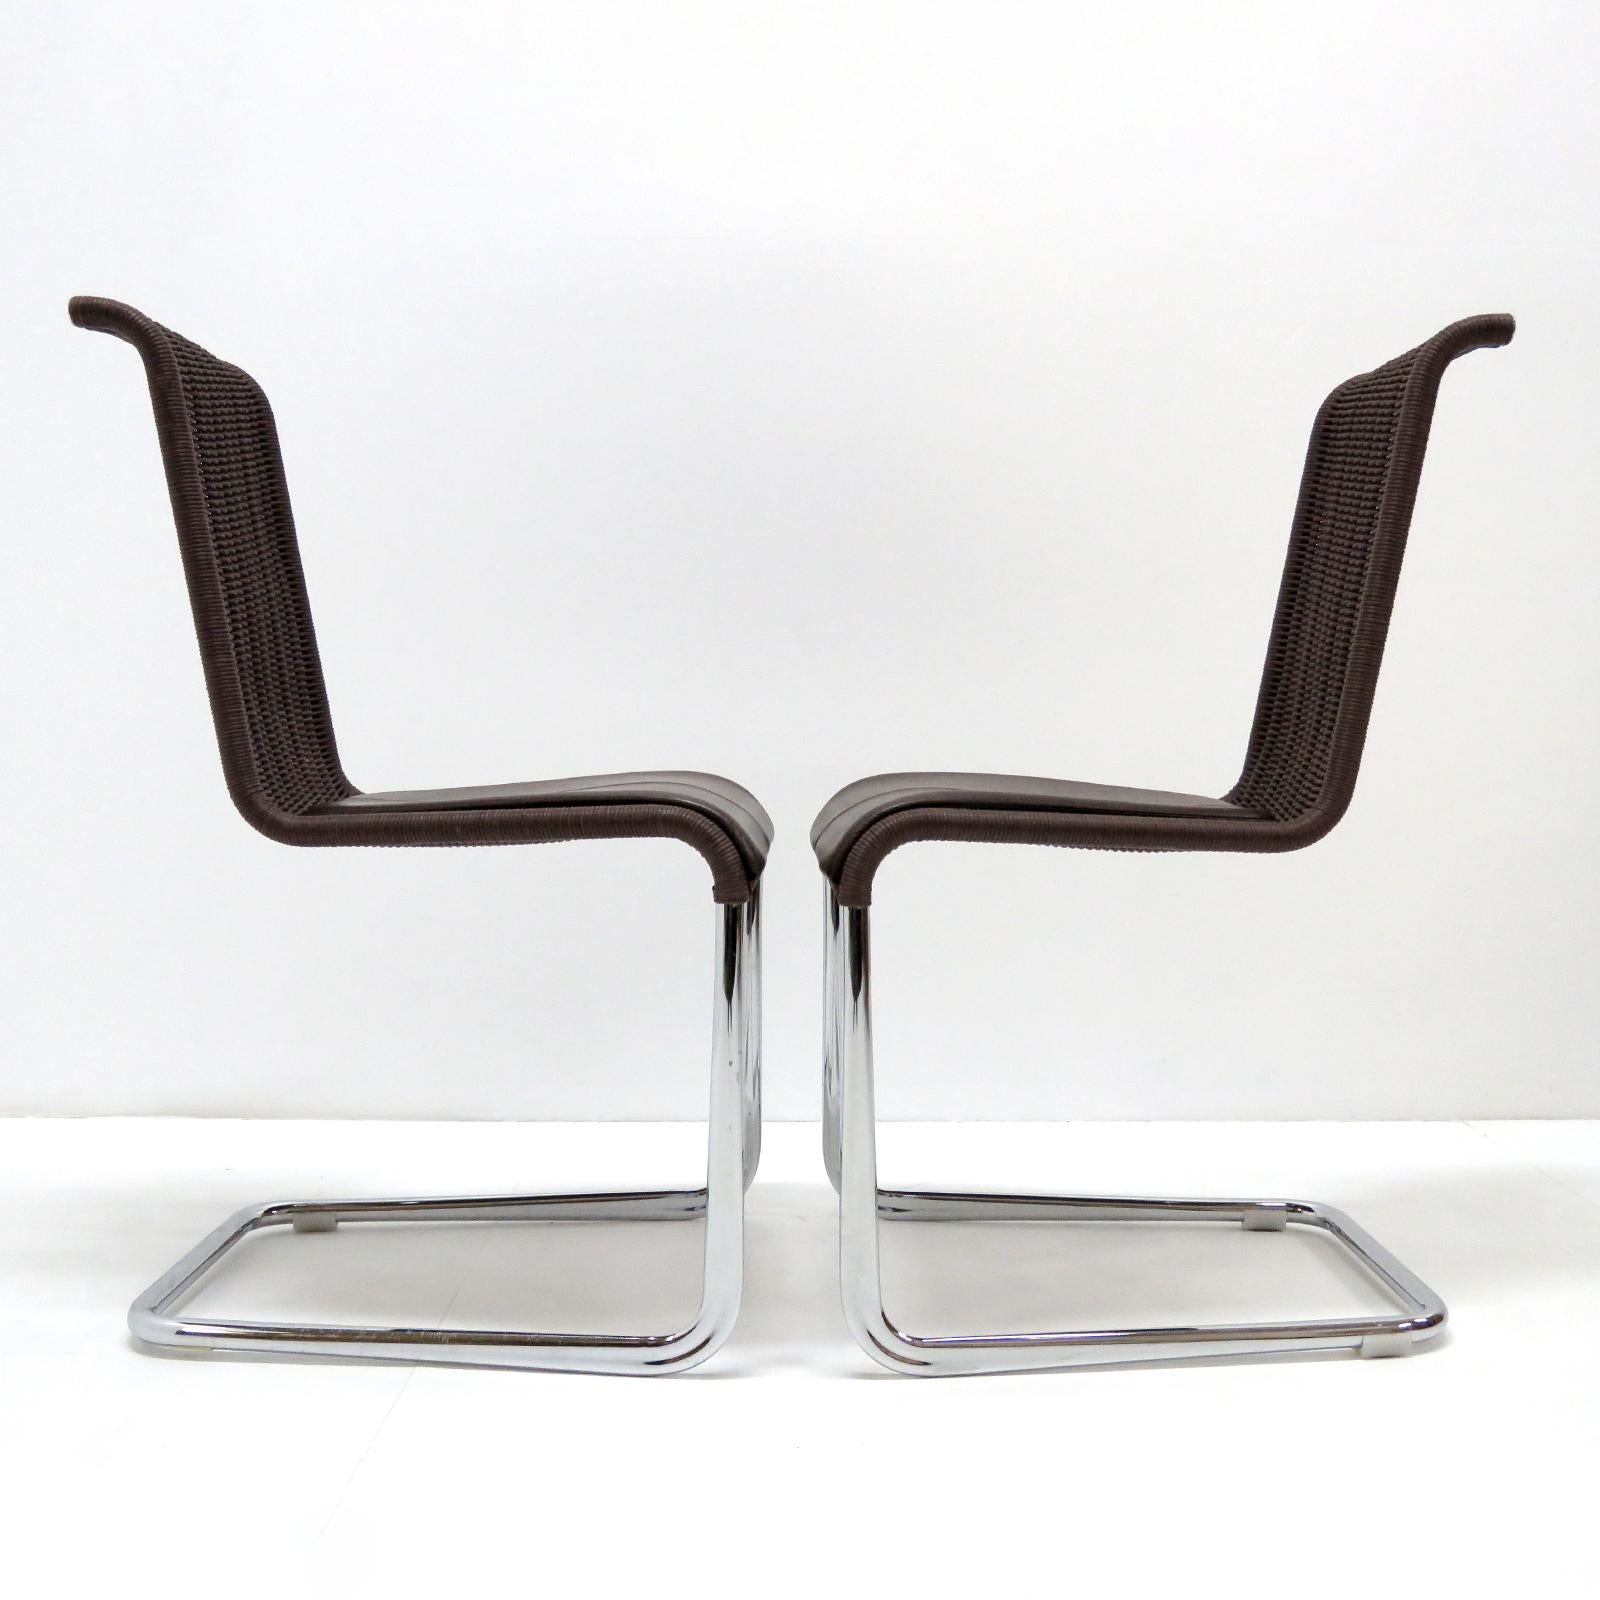 Axel Brüchhauser for Tecta B45 High Back Chairs, 1981 For Sale 5